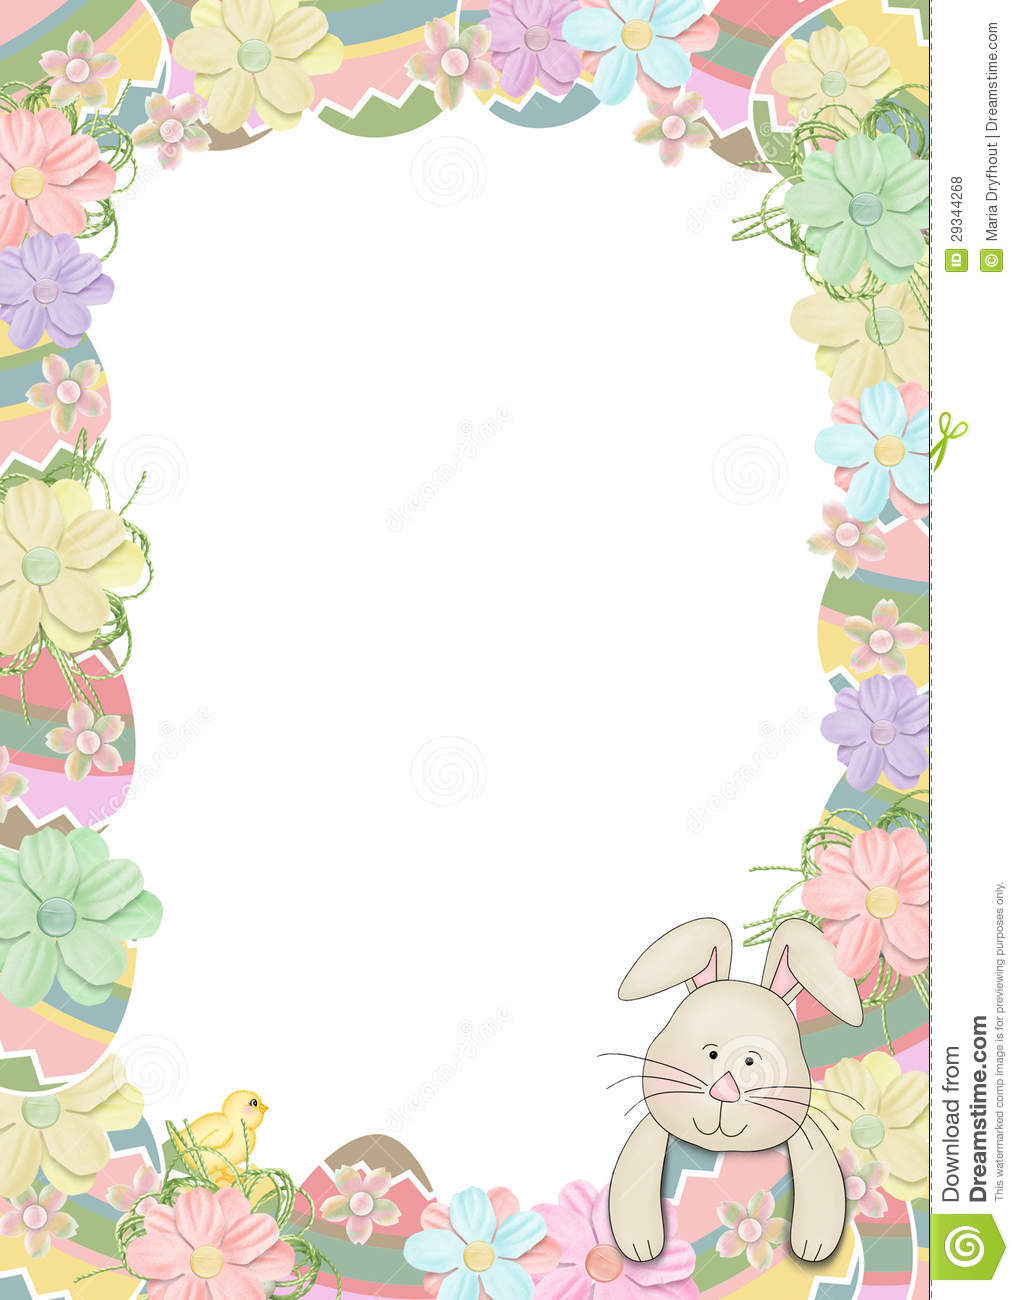 Easter Egg Border With Bunny Royalty Free Stock Photos Image